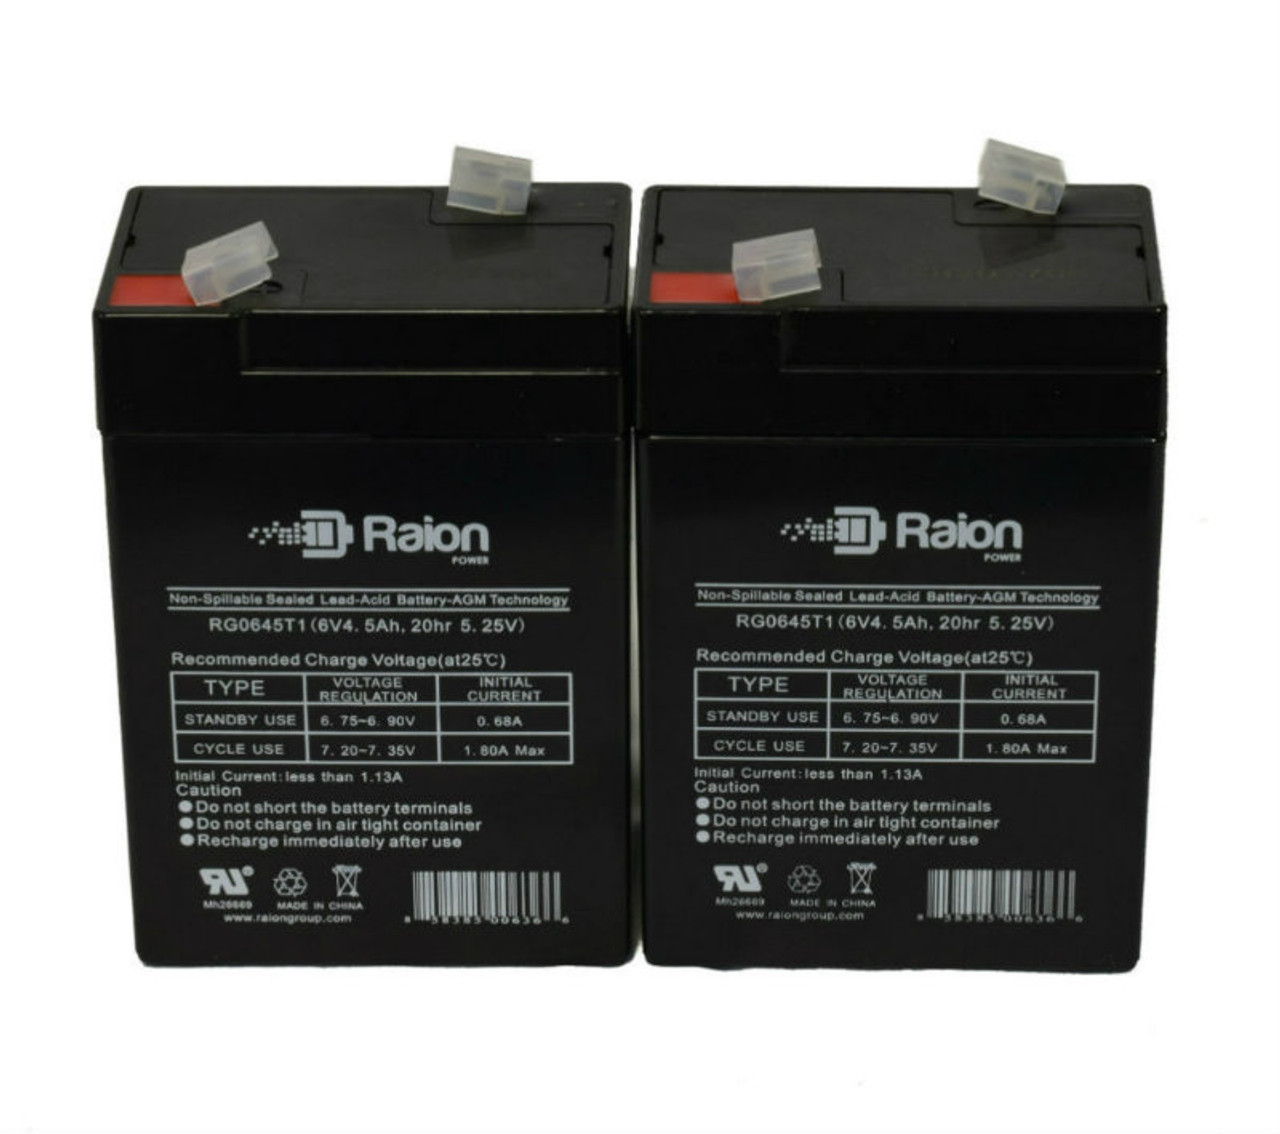 Raion Power 6V 4.5Ah Replacement Emergency Light Battery for Light Alarms XE8 - 2 Pack